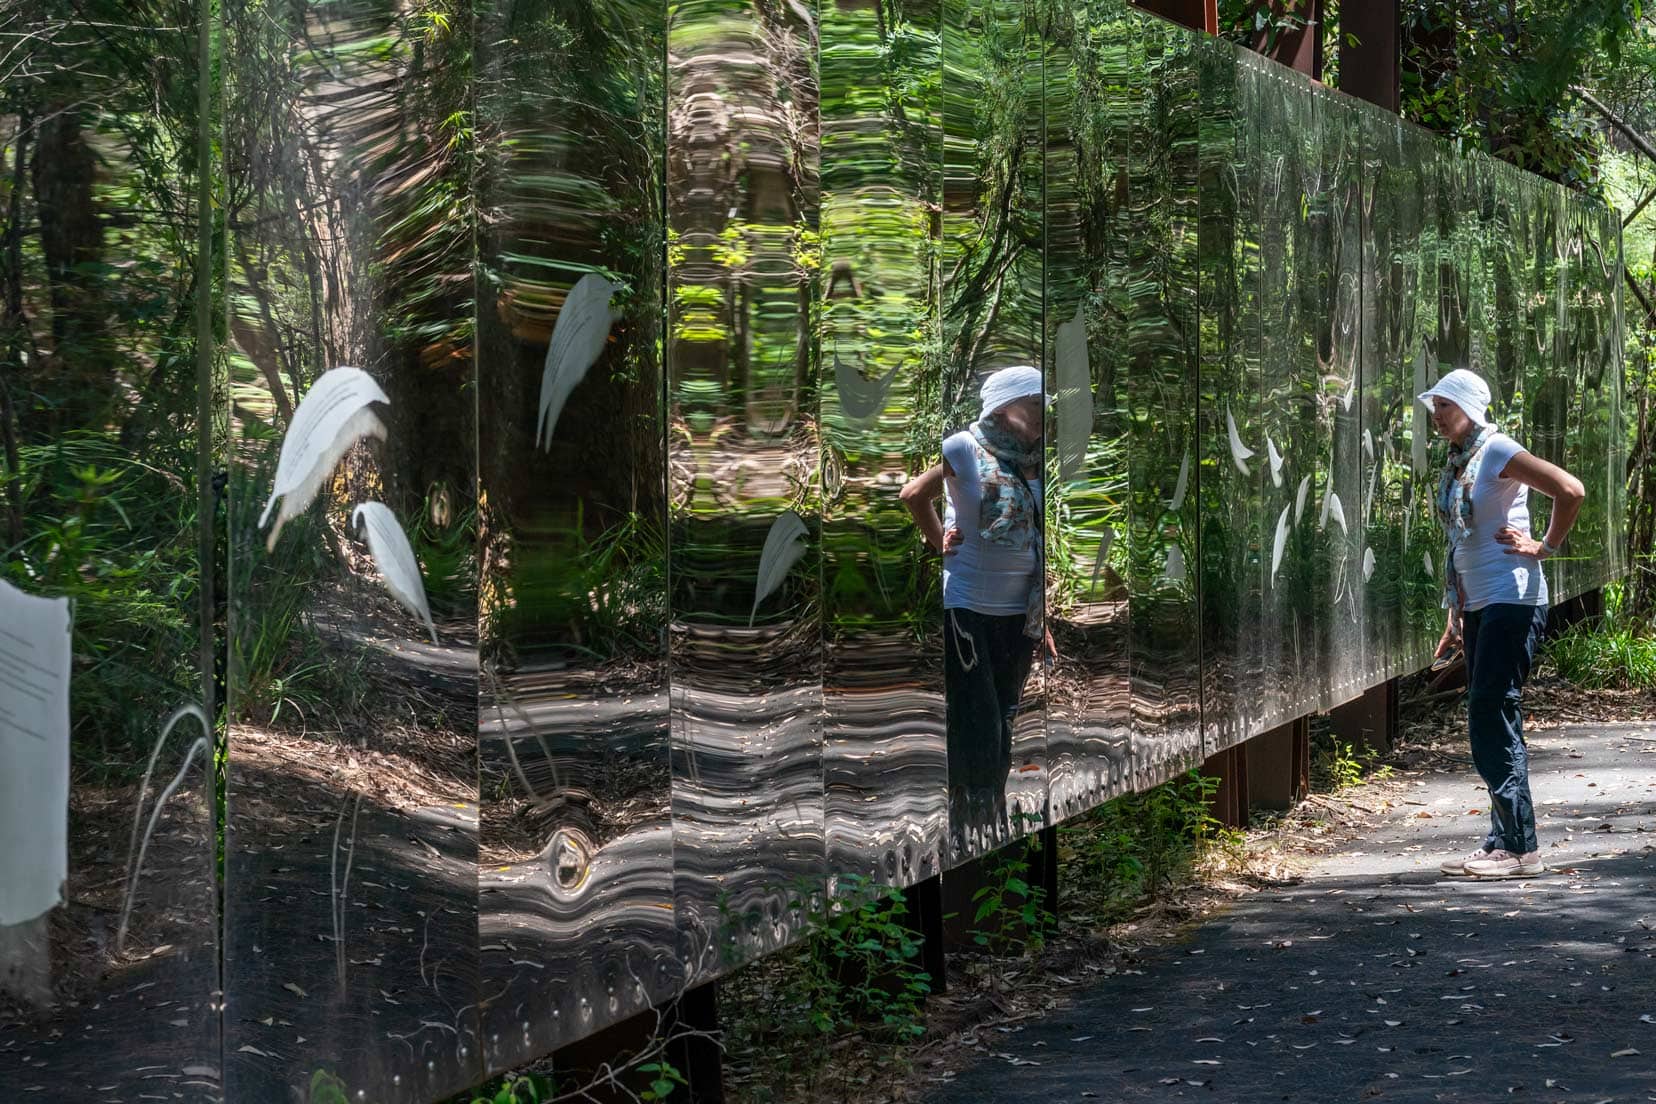 Shelley stood in front of the mirrored wall at Swarbrick art Loop with reflections of the forest 